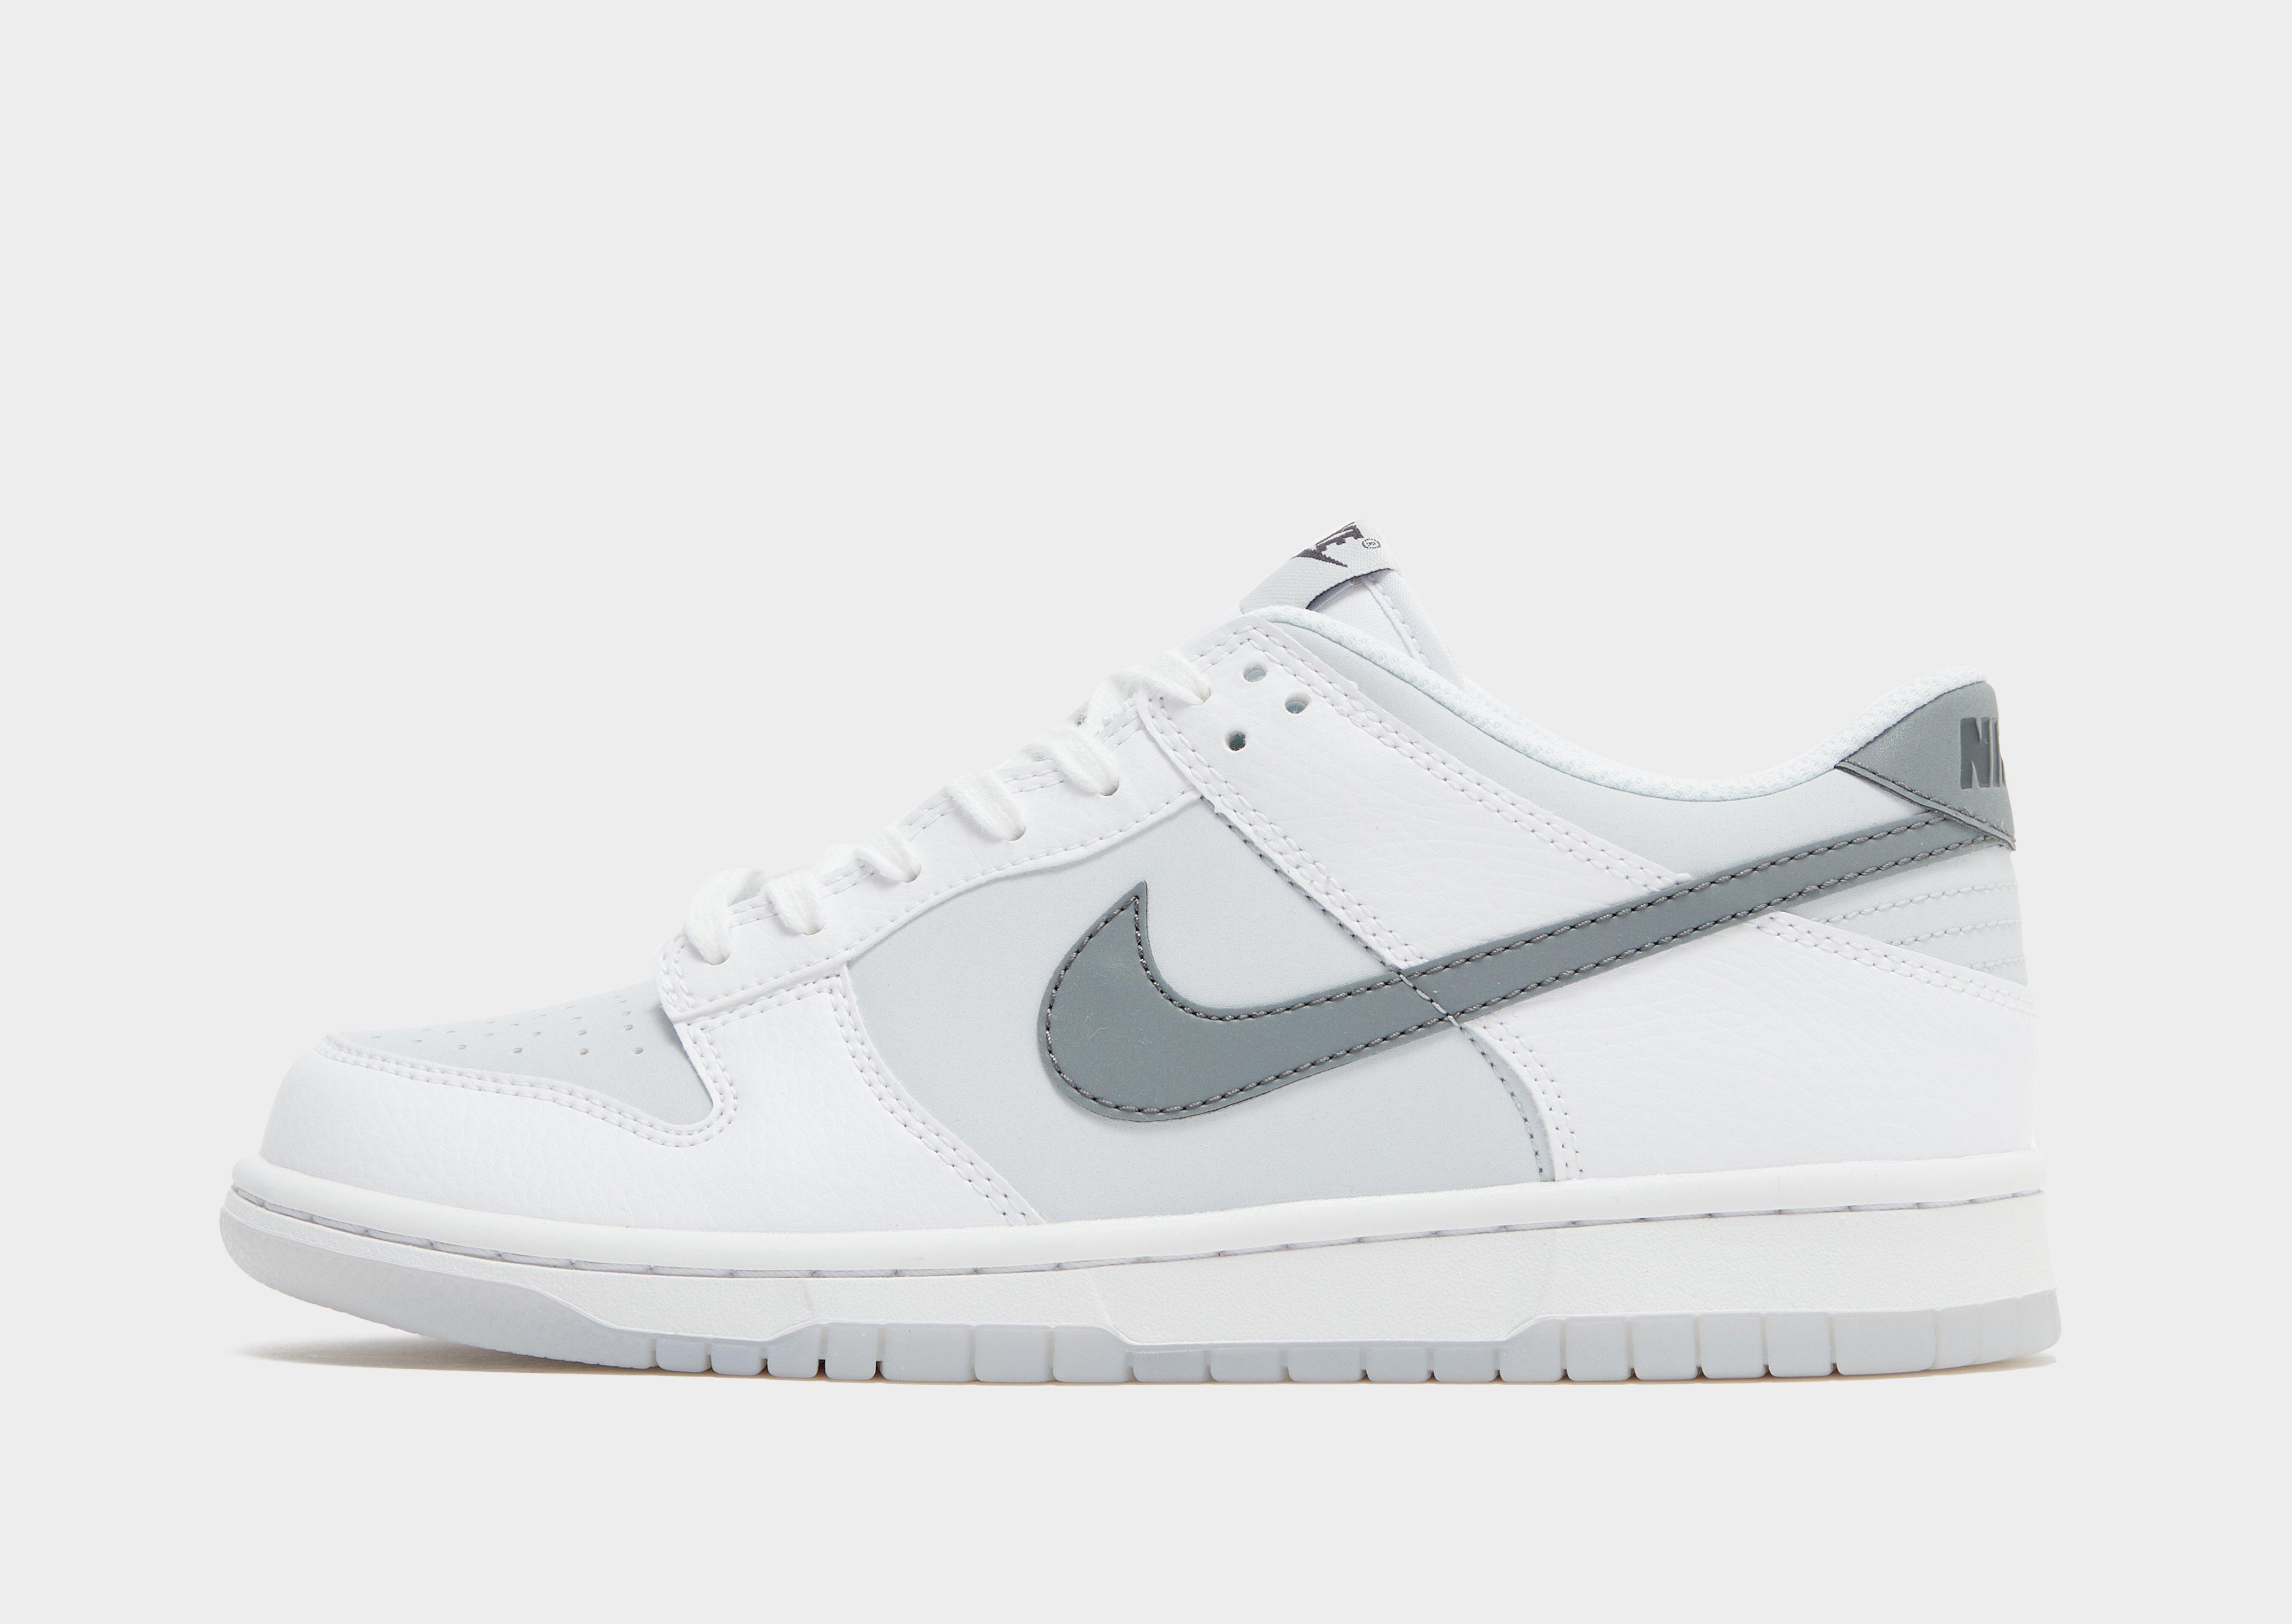 This Nike Dunk Low Features Mini Swoosh Details And A Wolf Grey